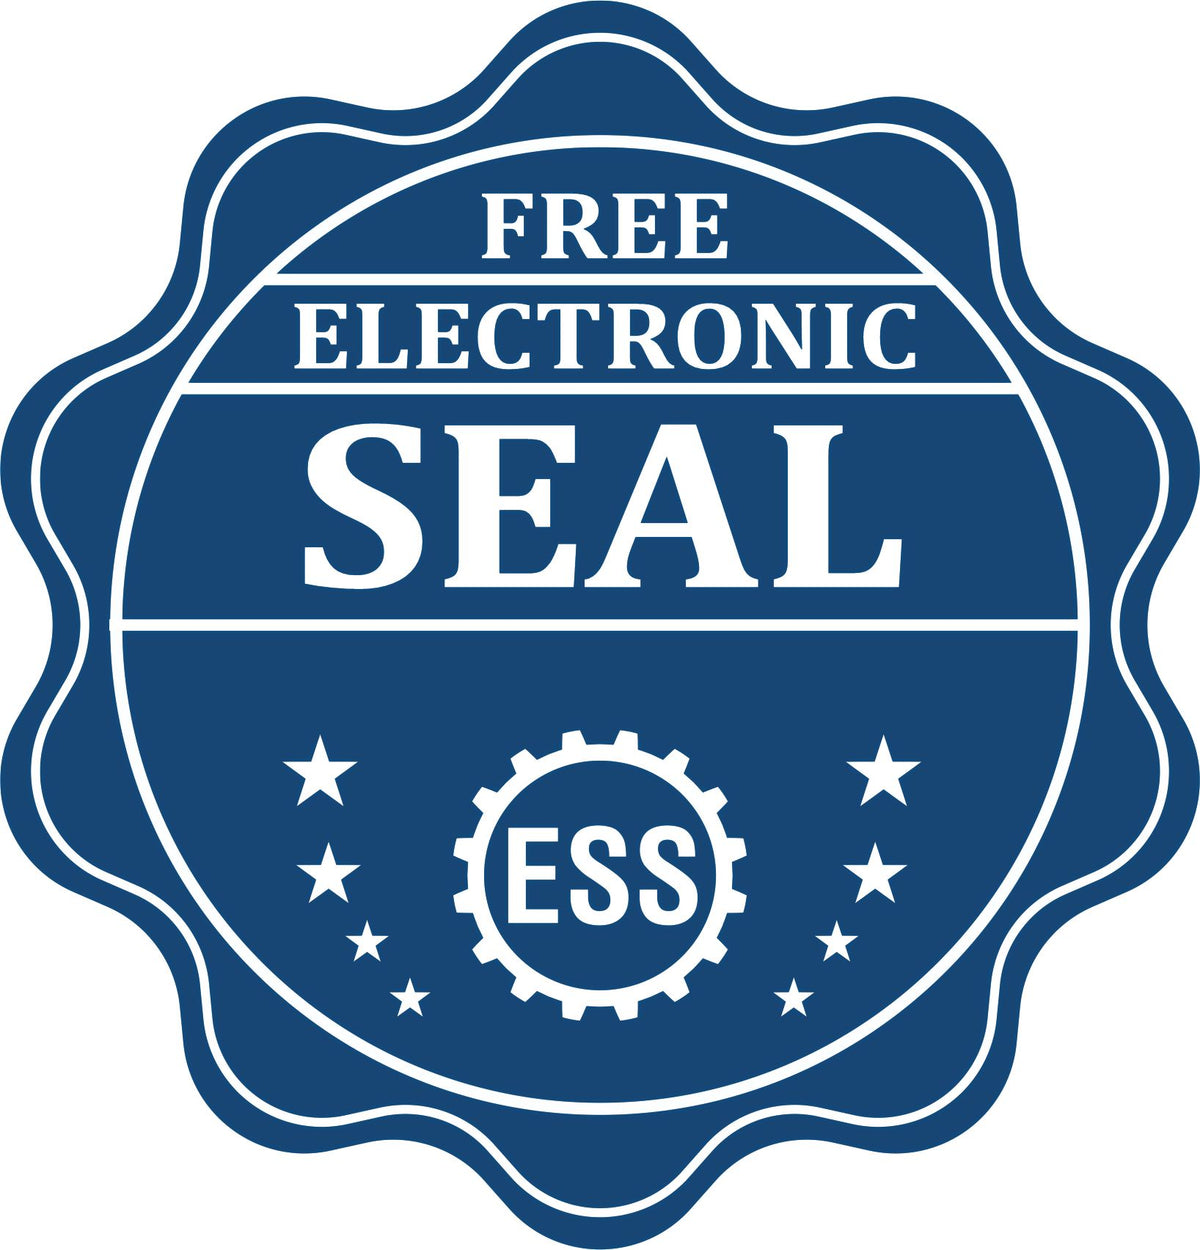 A badge showing a free electronic seal for the Soft New Mexico Professional Engineer Seal with stars and the ESS gear on the emblem.